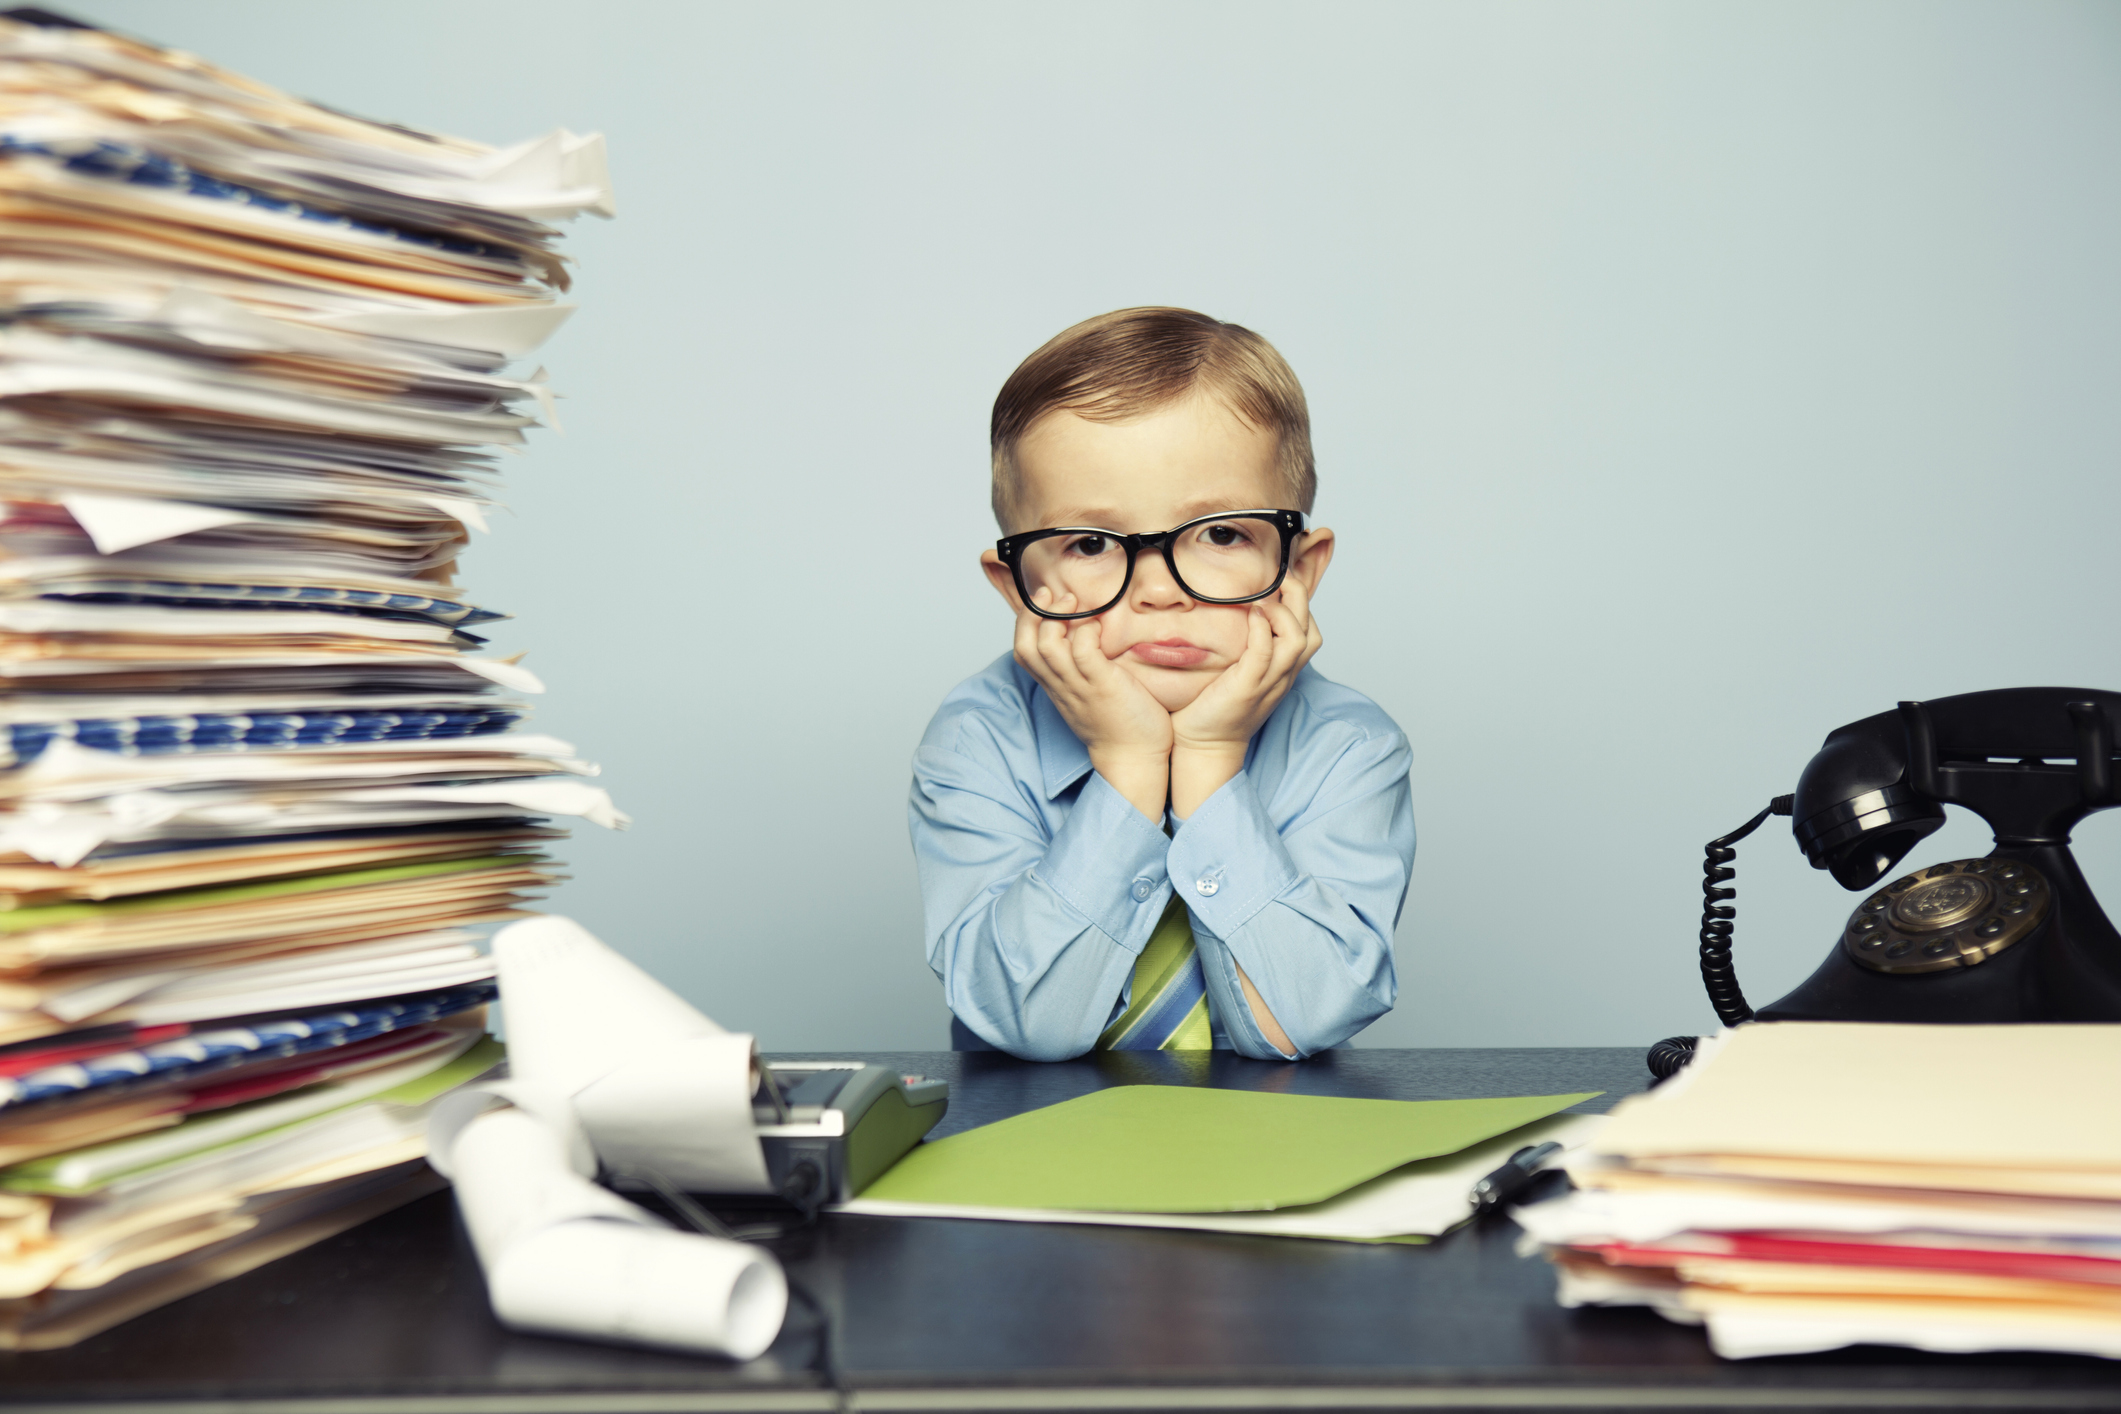 Ask a Bankruptcy Attorney: How Can I Prevent My Children from Growing Up with Excess Debt?